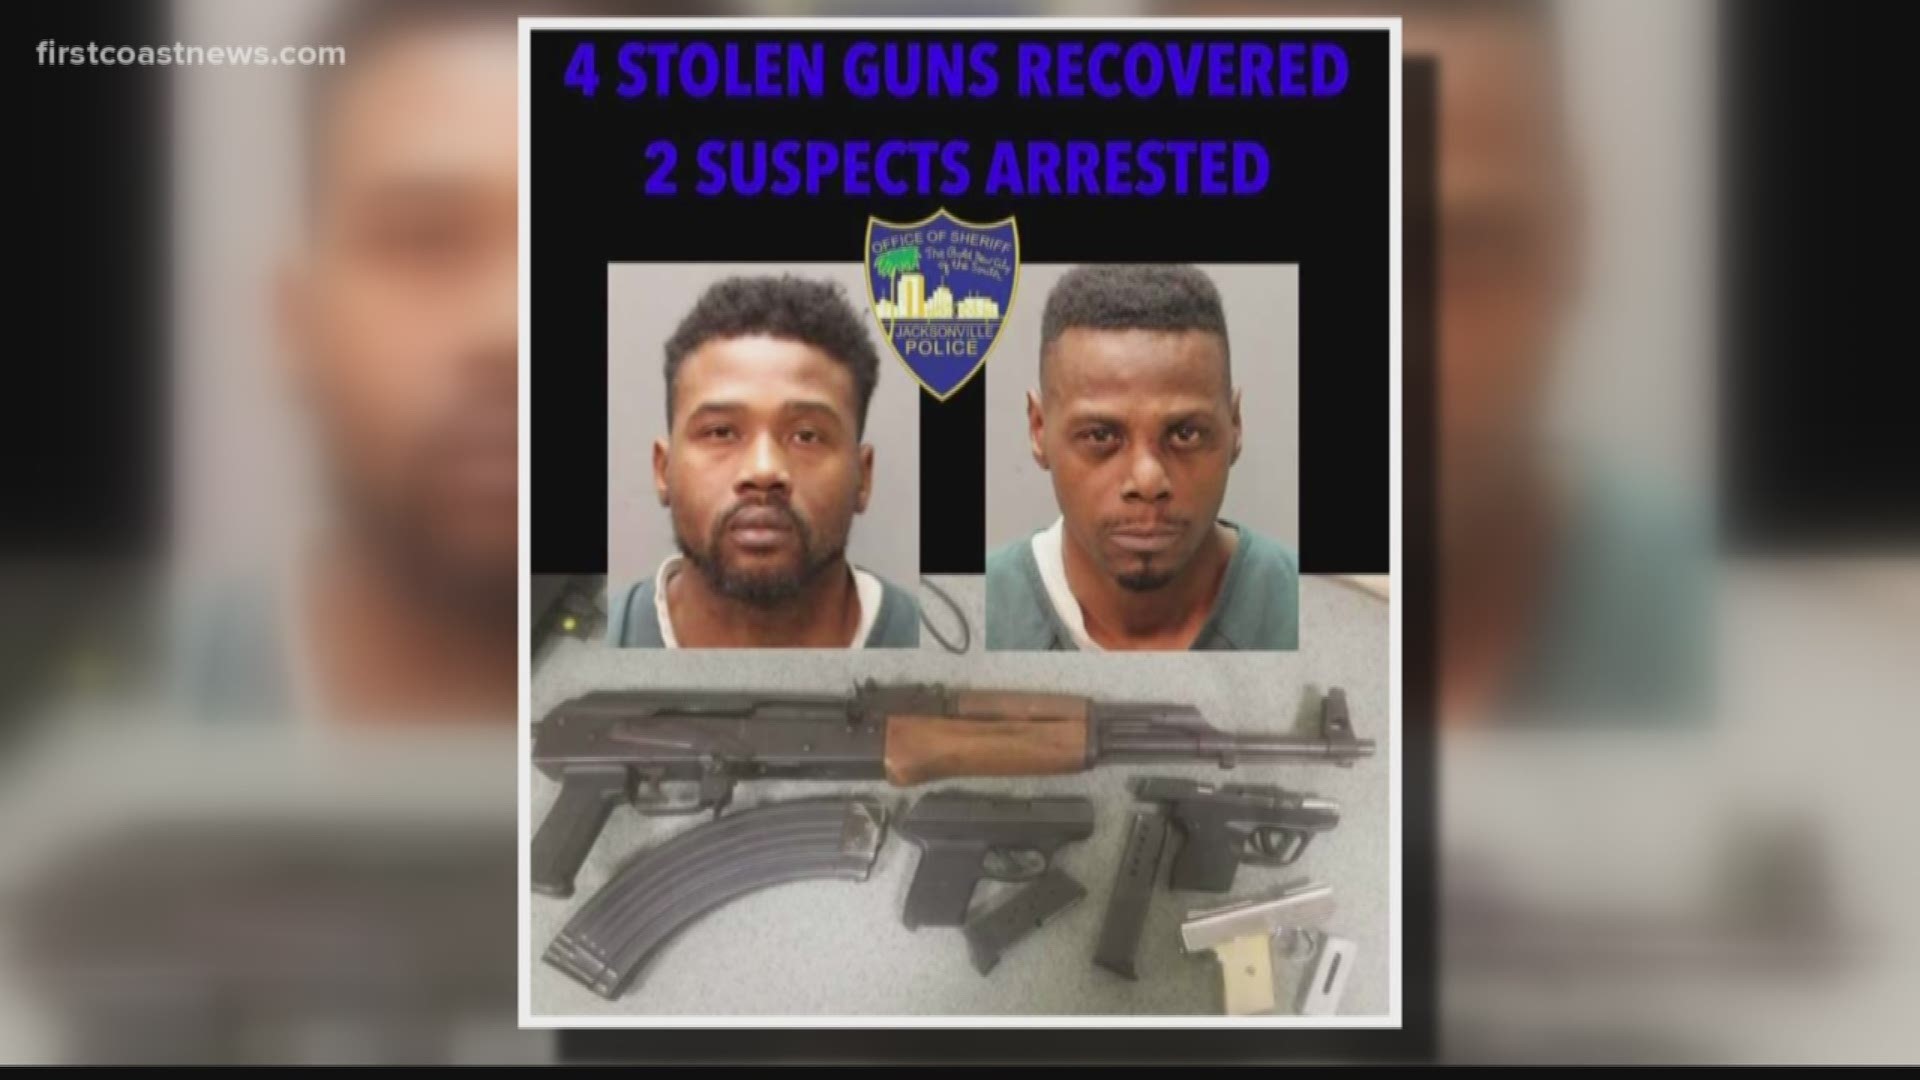 Two men were arrested and face multiple charges after four guns were found inside their car during a traffic stop.